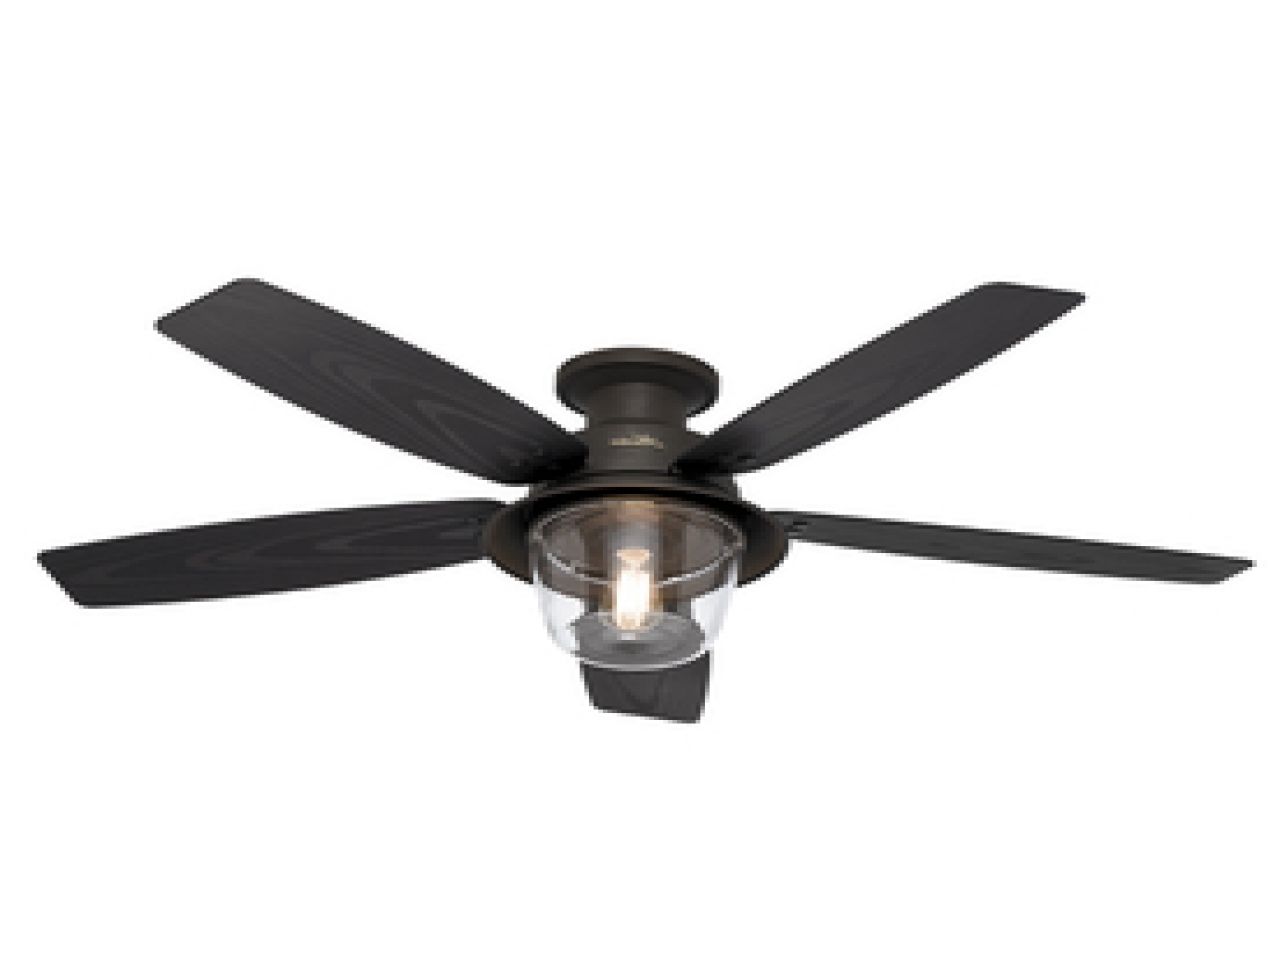 Outdoor Ceiling Fans Lights Wet Rated • Ceiling Lights Within Popular Black Outdoor Ceiling Fans With Light (View 2 of 20)